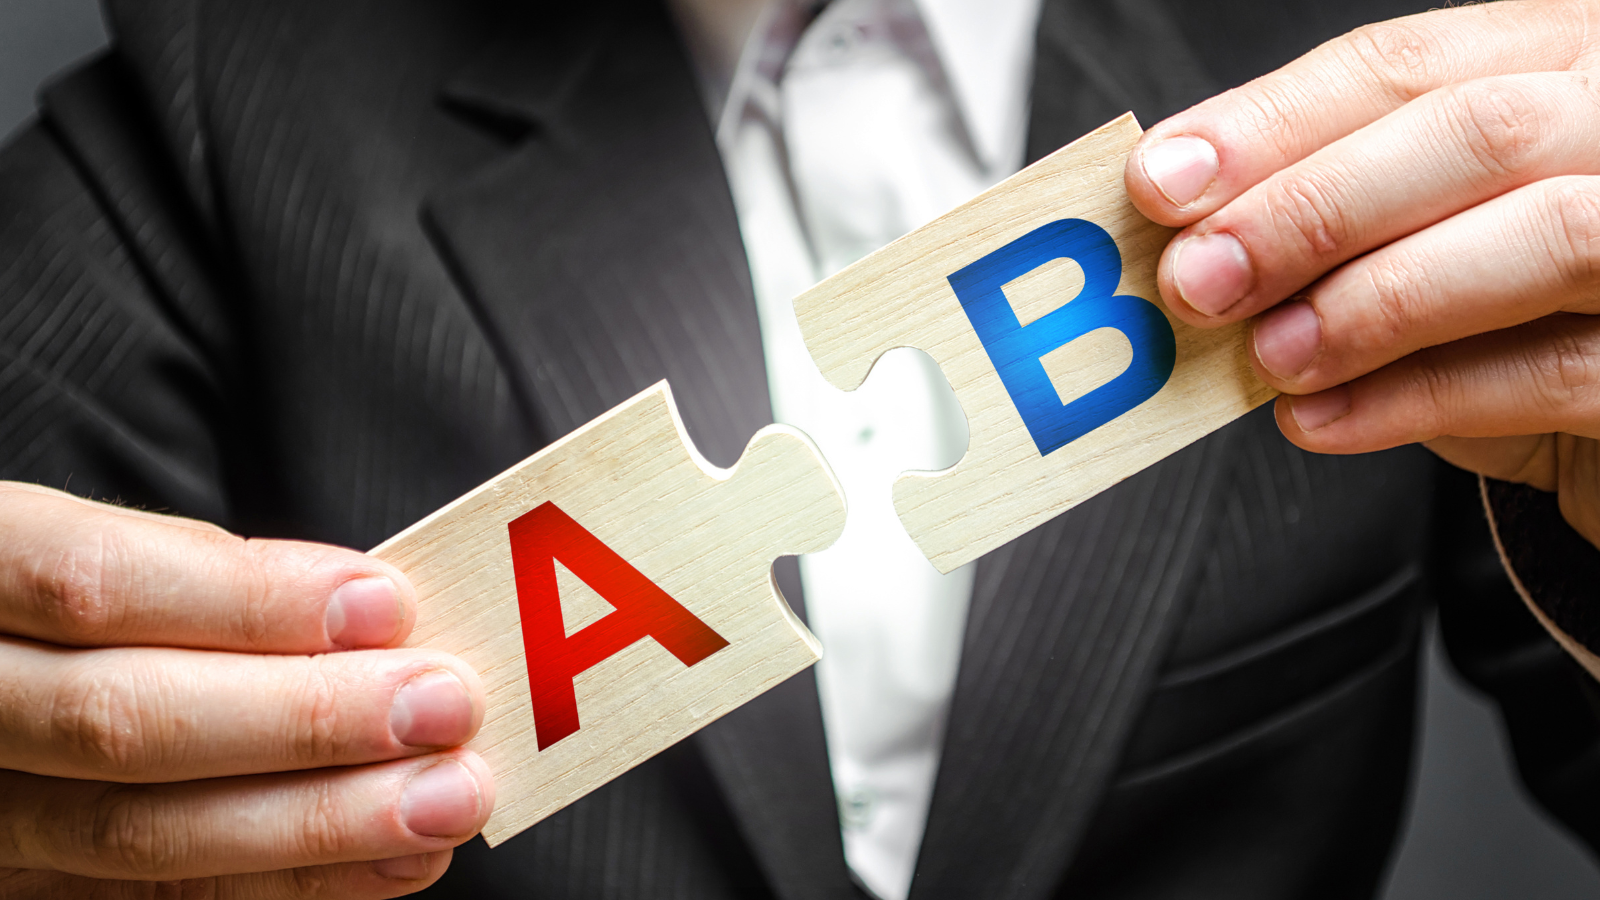 7 A/B Testing Ideas That Can Lead to Improved Blog Performance